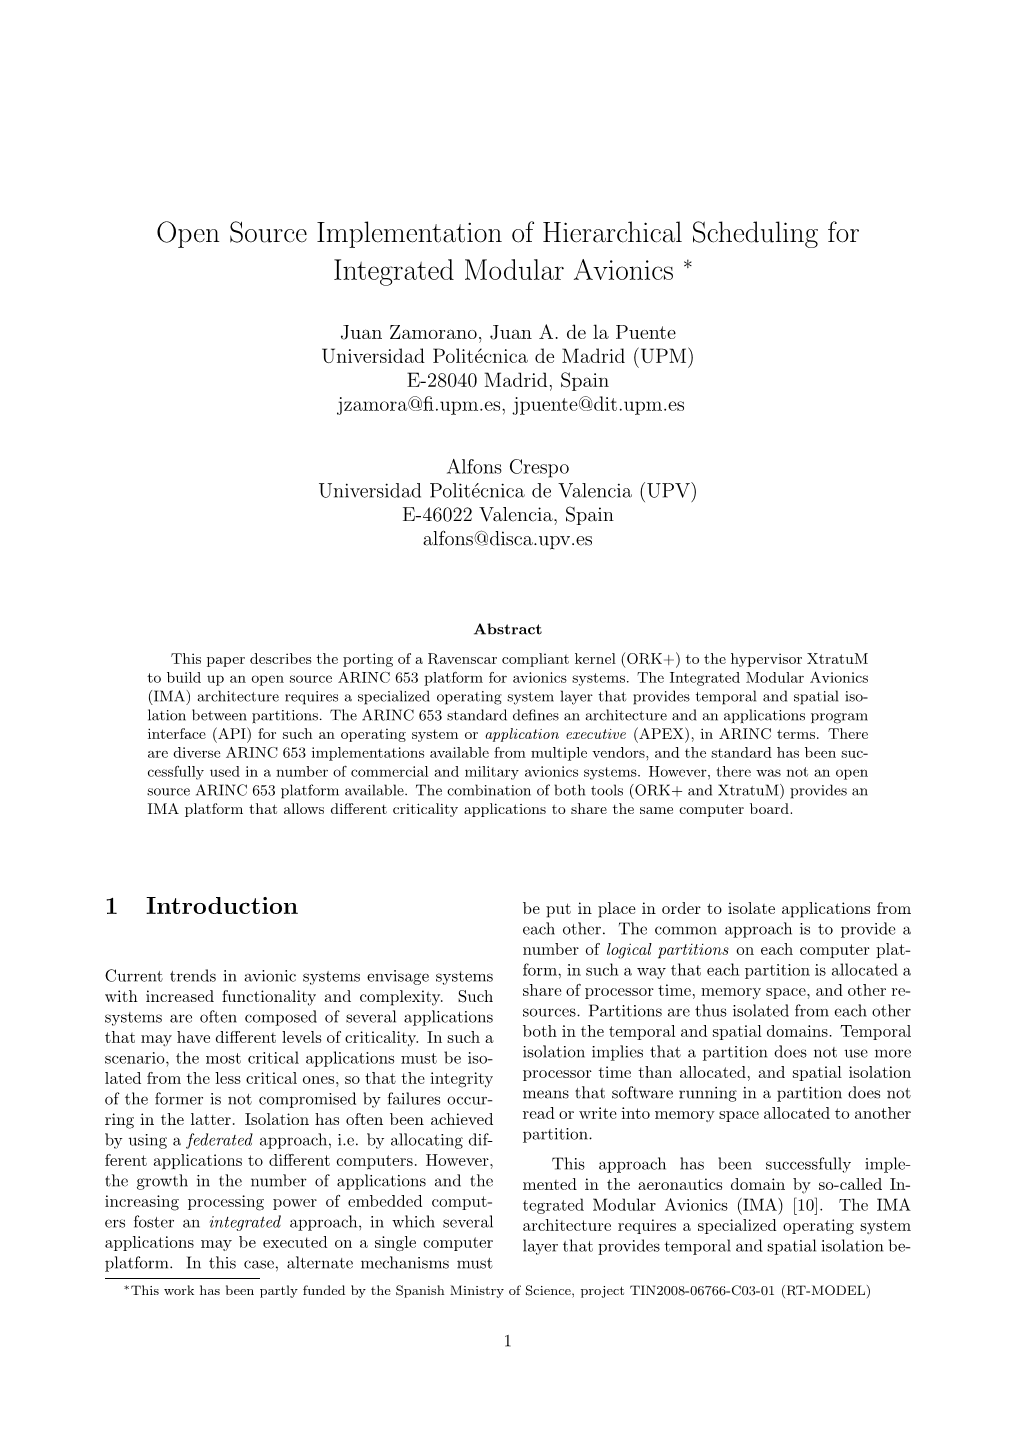 Open Source Implementation of Hierarchical Scheduling for Integrated Modular Avionics ∗